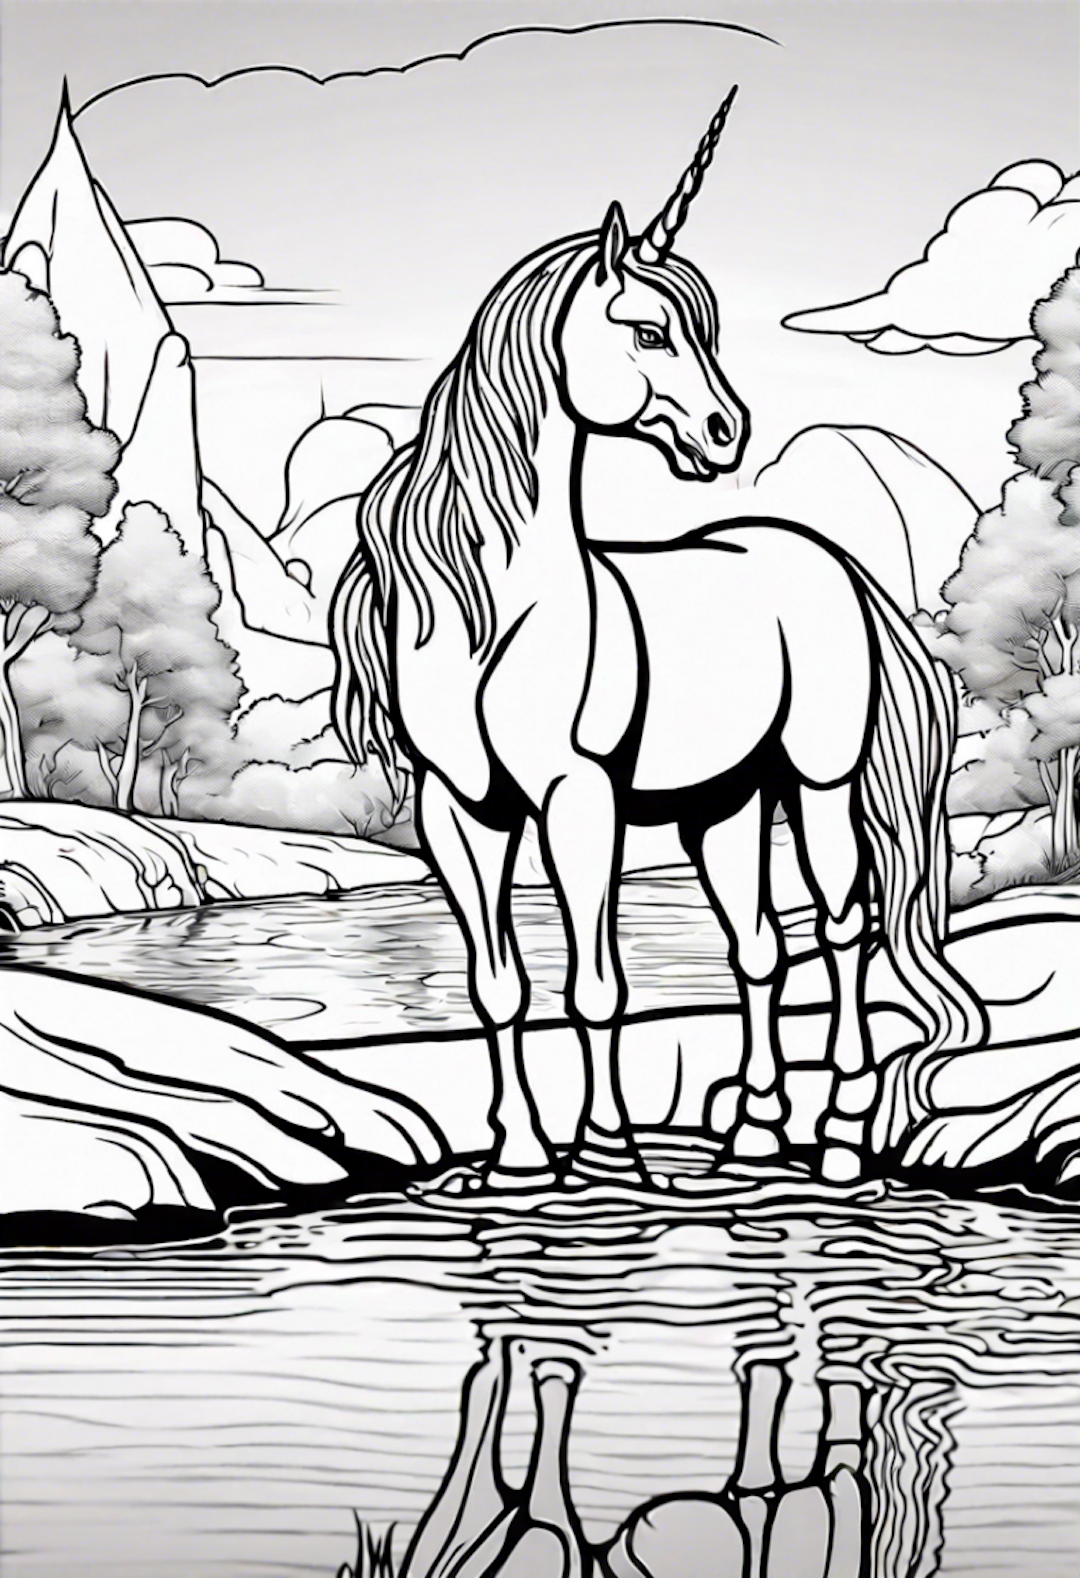 Ultrarealistic Unicorn Drinking From A River coloring pages